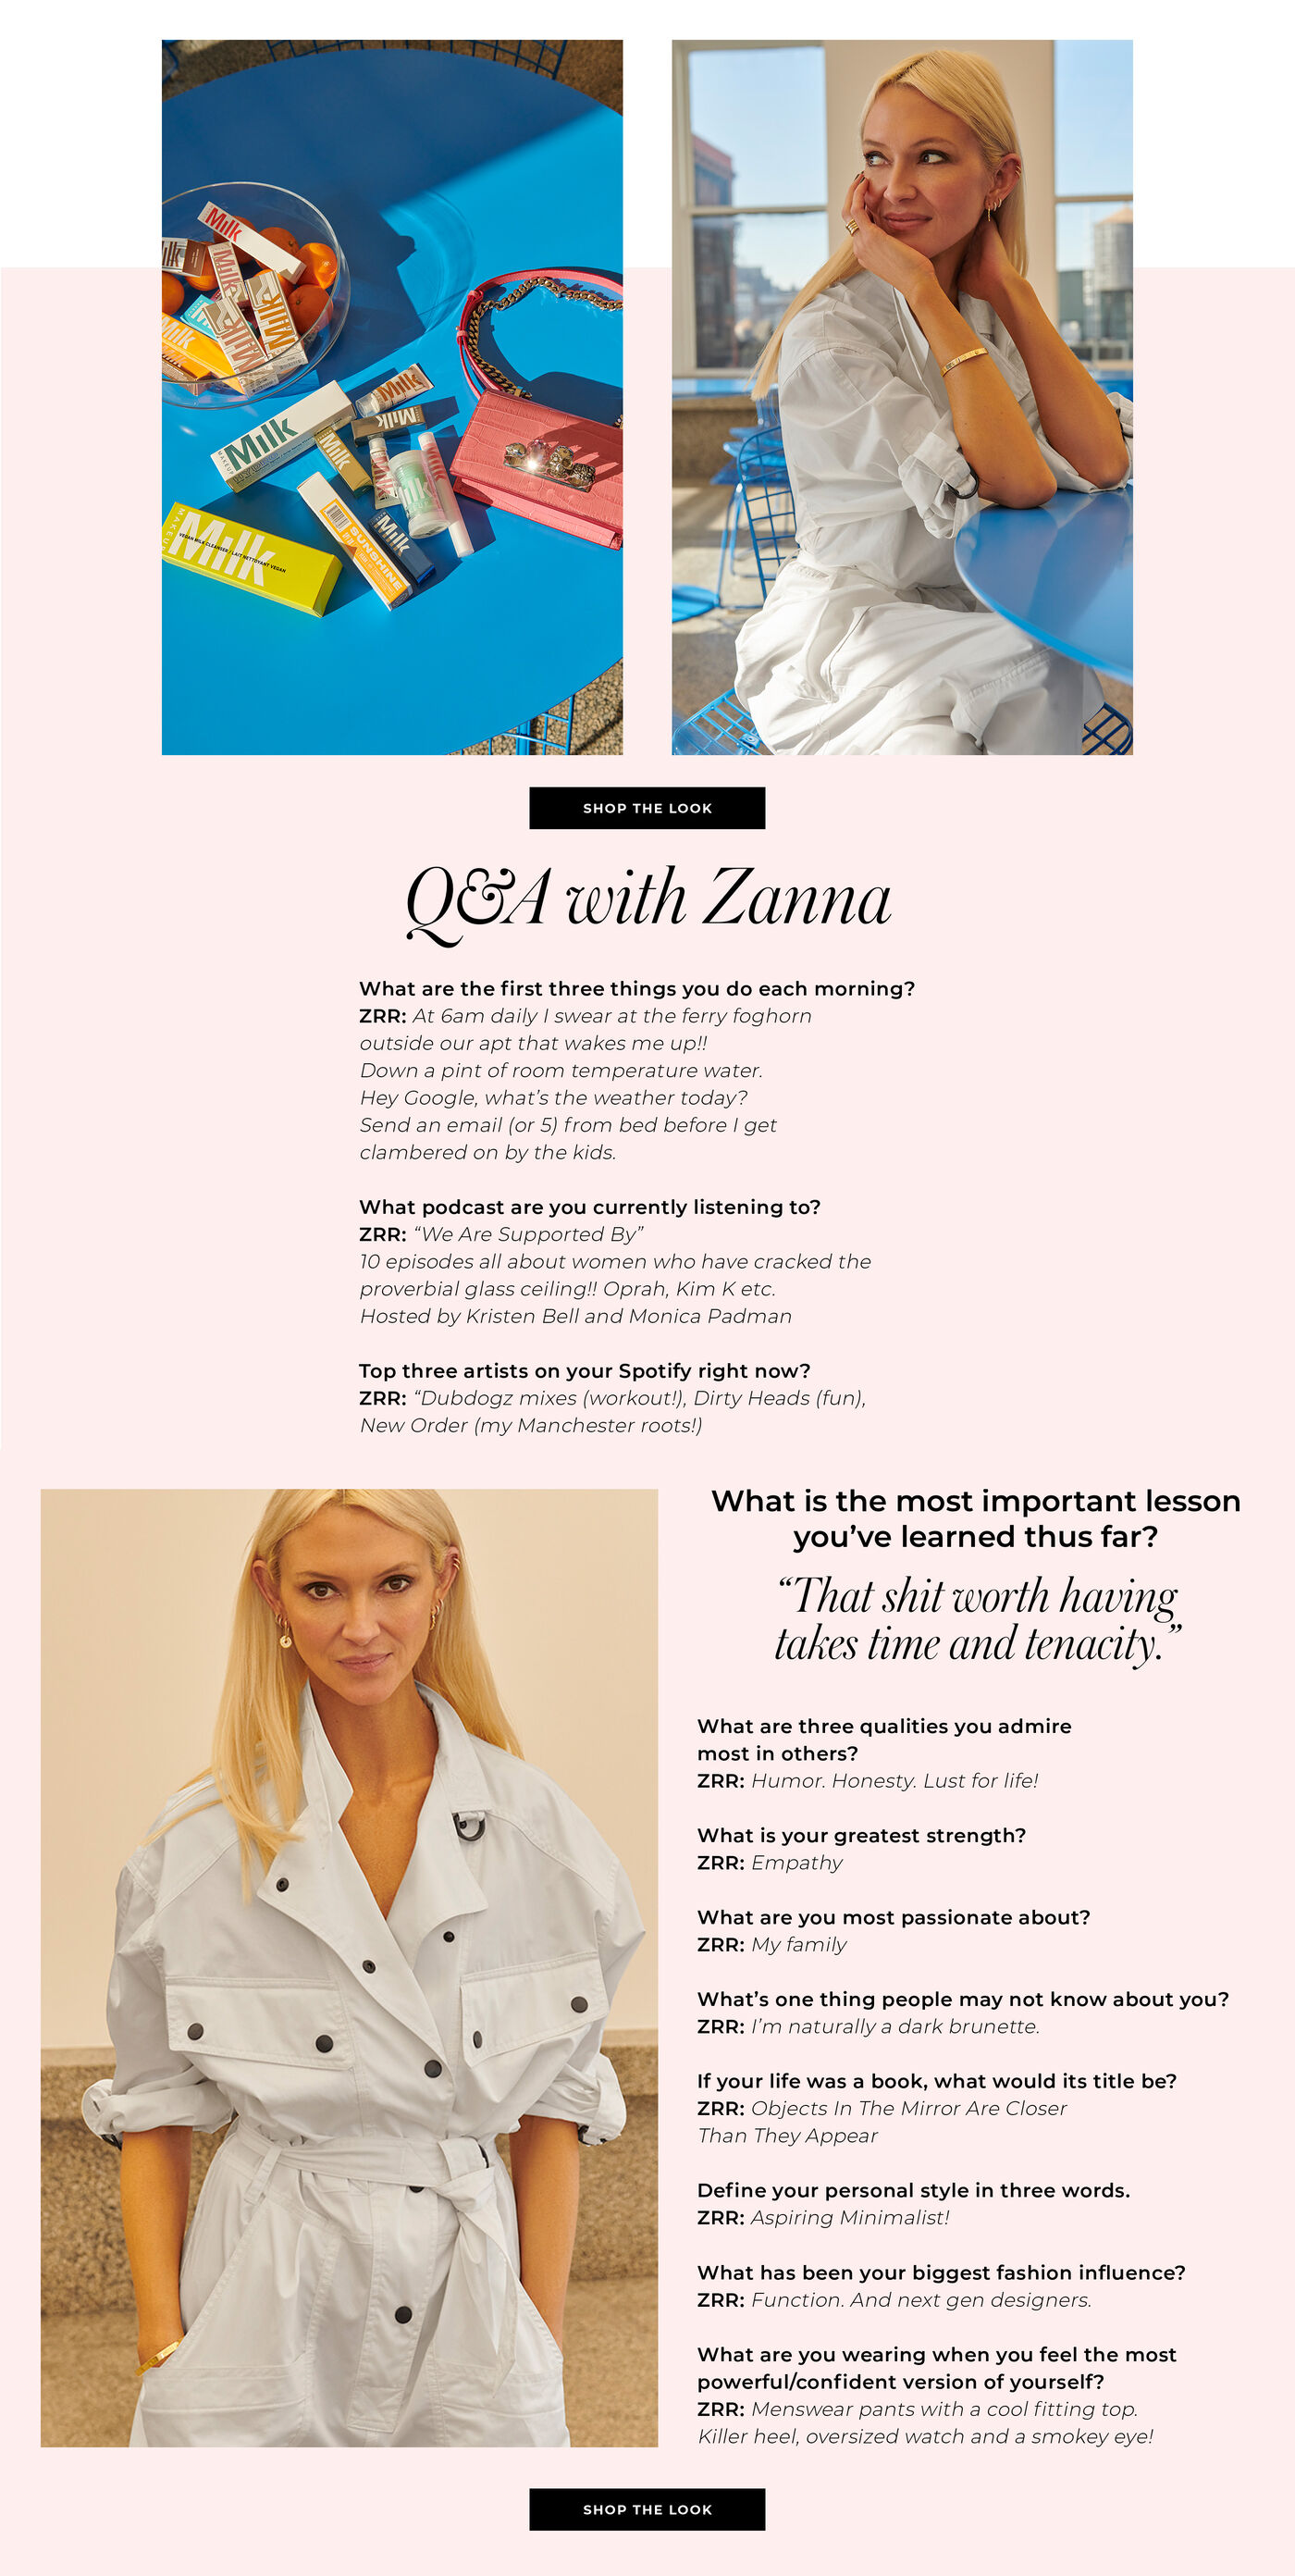 "Q&A with Zana What are the first three things you do each morning? ZRR: At 6am daily I swear at the ferry foghorn outside our apt that wakes me up!! Down a pint of room temperature water. Hey Google, what's the weather today? Send an email (or 5) from bed before I get clambered on by the kids. What podcast are you currently listening to? ZRR: ""We Are Supported By"" 10 episodes all about women who have cracked the proverbial glass ceiling!! Oprah, Kim K etc. Hosted by Kristen Bell and Monica Padman Top three artists on your Spotify right now? ZRR: ""Dubdogz mixes (workout!), Dirty Heads (fun), New Order (my Manchester roots!) What is the most important lesson you've learned thus far? ""That shit worth having, takes time and tenacity."" What are three qualities you admire most in others? ZRR: Humor. Honesty. Lust for life! What is your greatest strength? ZRR: Empathy What are you most passionate about? ZRR: My family What's one thing people may not know about you? RR: I'm naturally a dark brunette. If your life was a book, what would its title be? ZRR: Objects In The Mirror Are Closer Than They Appear Define your personal style in three words. ZRR: Aspiring Minimalist! What has been your biggest fashion influence? ZRR: Function. And next gen designers. What are you wearing when you feel the most powerful/confident version of yourself? ZRR: Menswear pants with a cool fitting top. Killer heel, oversized watch and a smokey eye!"